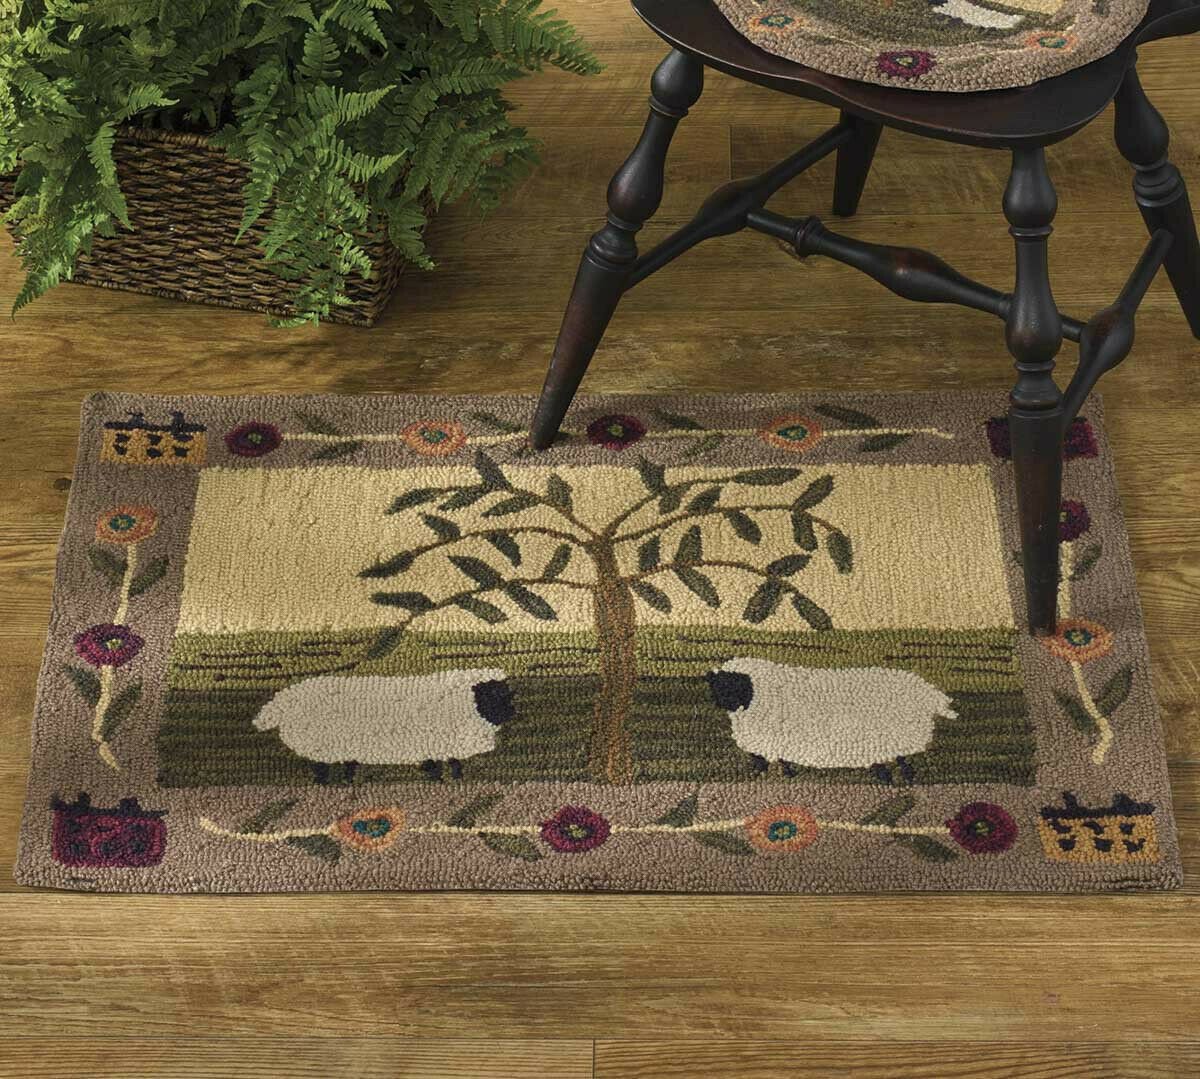 Primitive/Farmhouse Willow and Sheep Hooked Accent Rug 2x3 - The Primitive Pineapple Collection